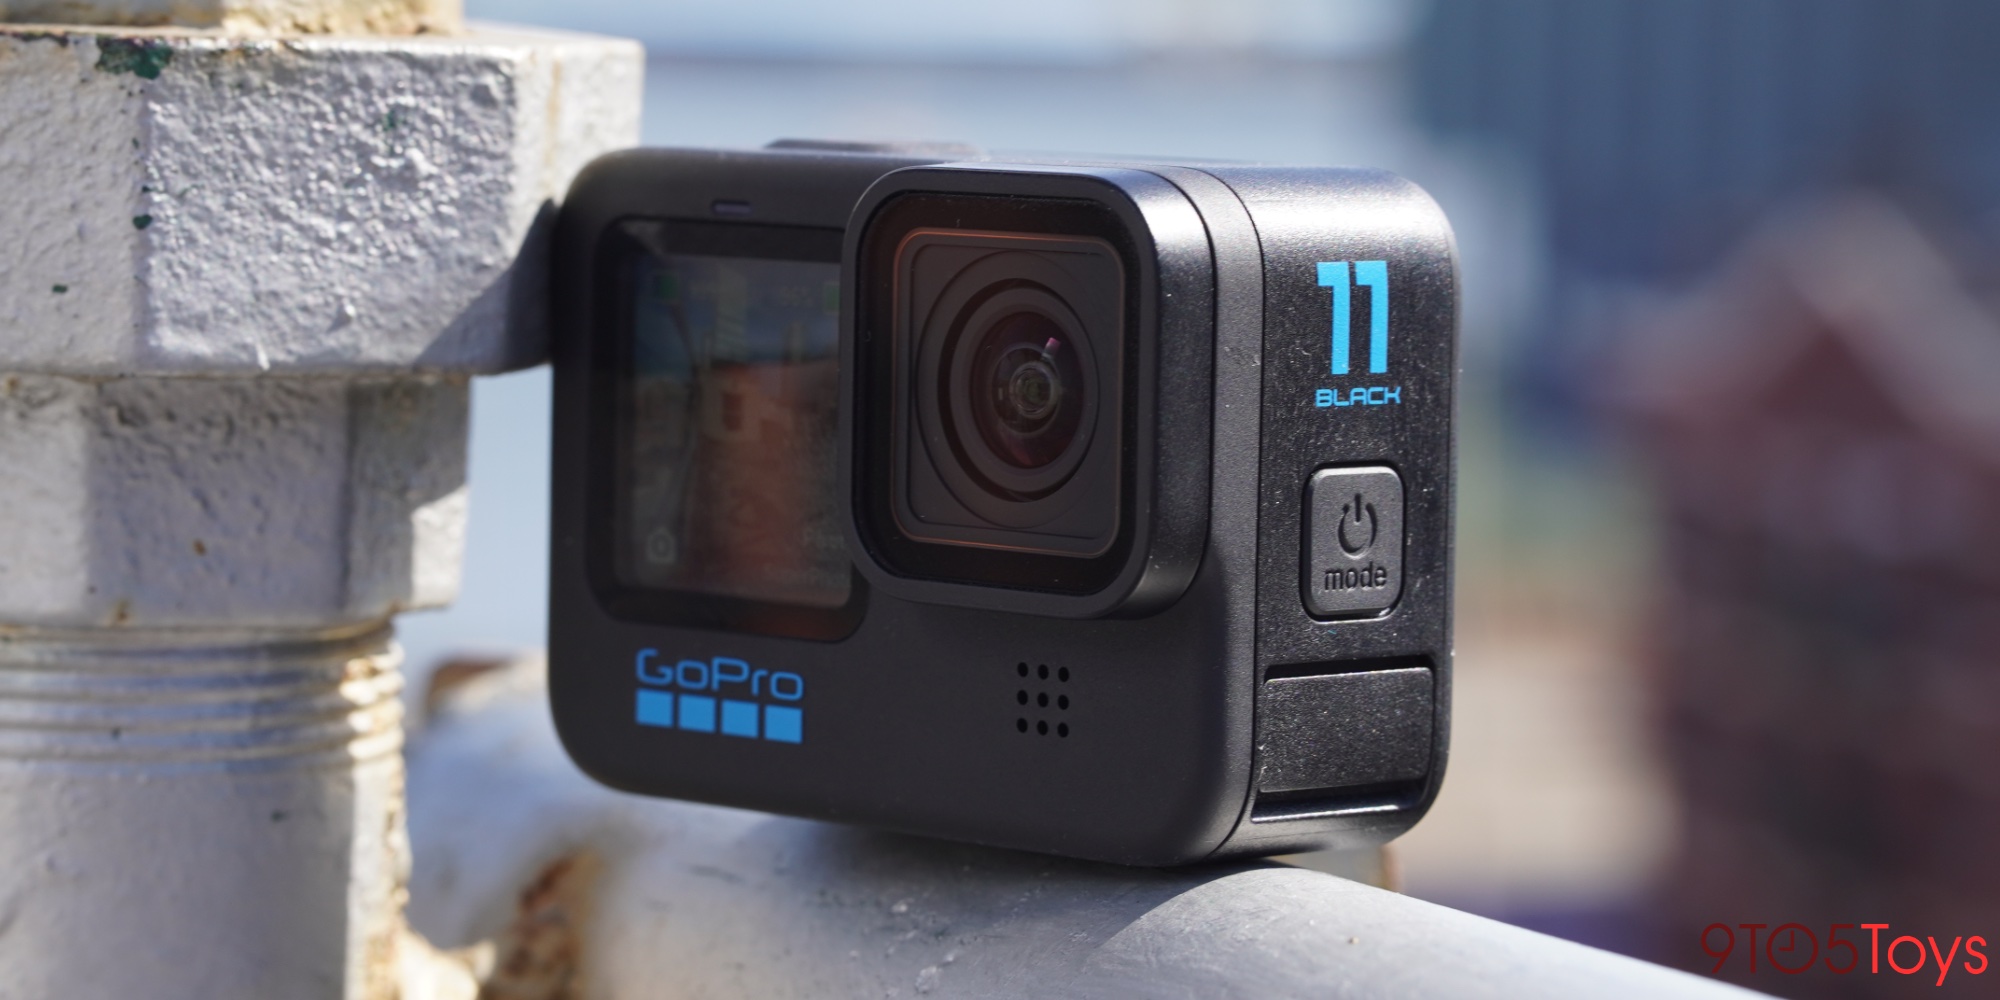 has the GoPro 11 for its lowest price ever